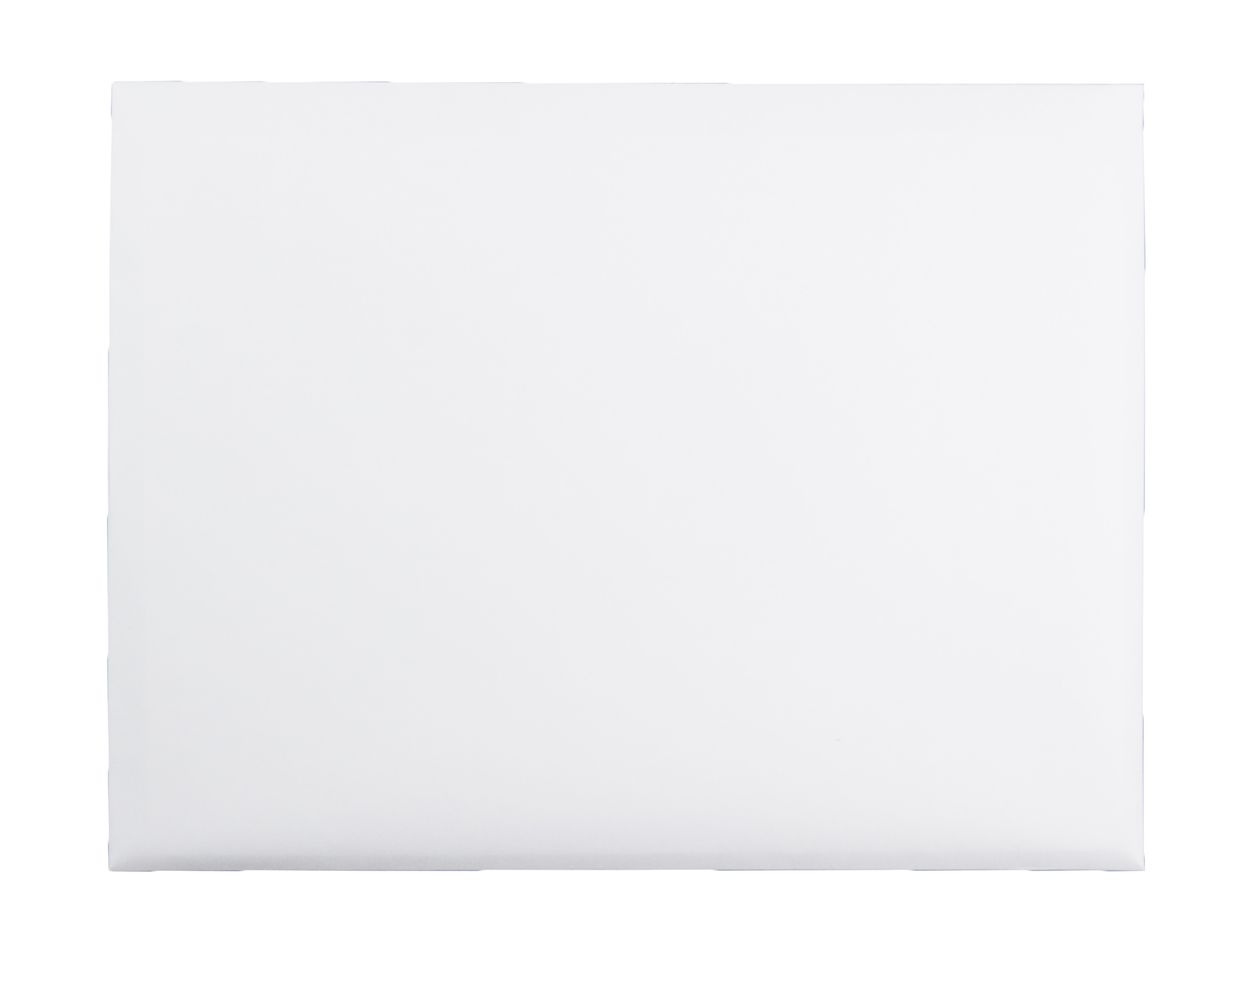 Monarchy Dinkarville Pygmalion 9 x 12 Booklet Envelopes with Deeply Gummed Flap, Open Side for Easy  Insertion, 24 lb. White Wove, 100 per Box